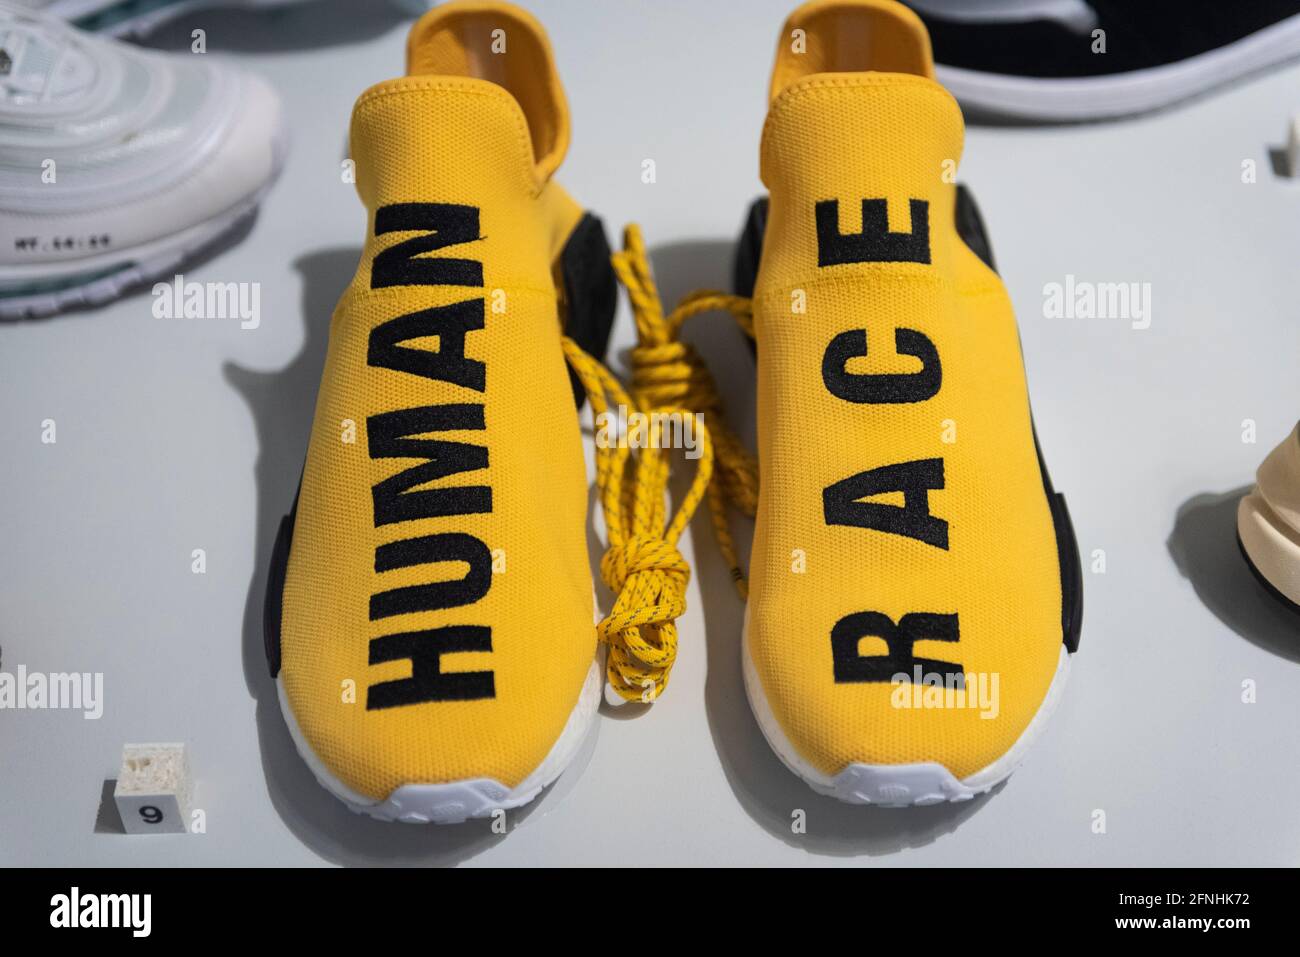 London, UK. 17 May 2021. Adidas NMD HU Pharrell Human Race "Yellow", 2016,  a collaboration between Adidas and musician Pharrell Williams. Preview of  “Sneakers Unboxed: Studio to Street” at the Design Museum